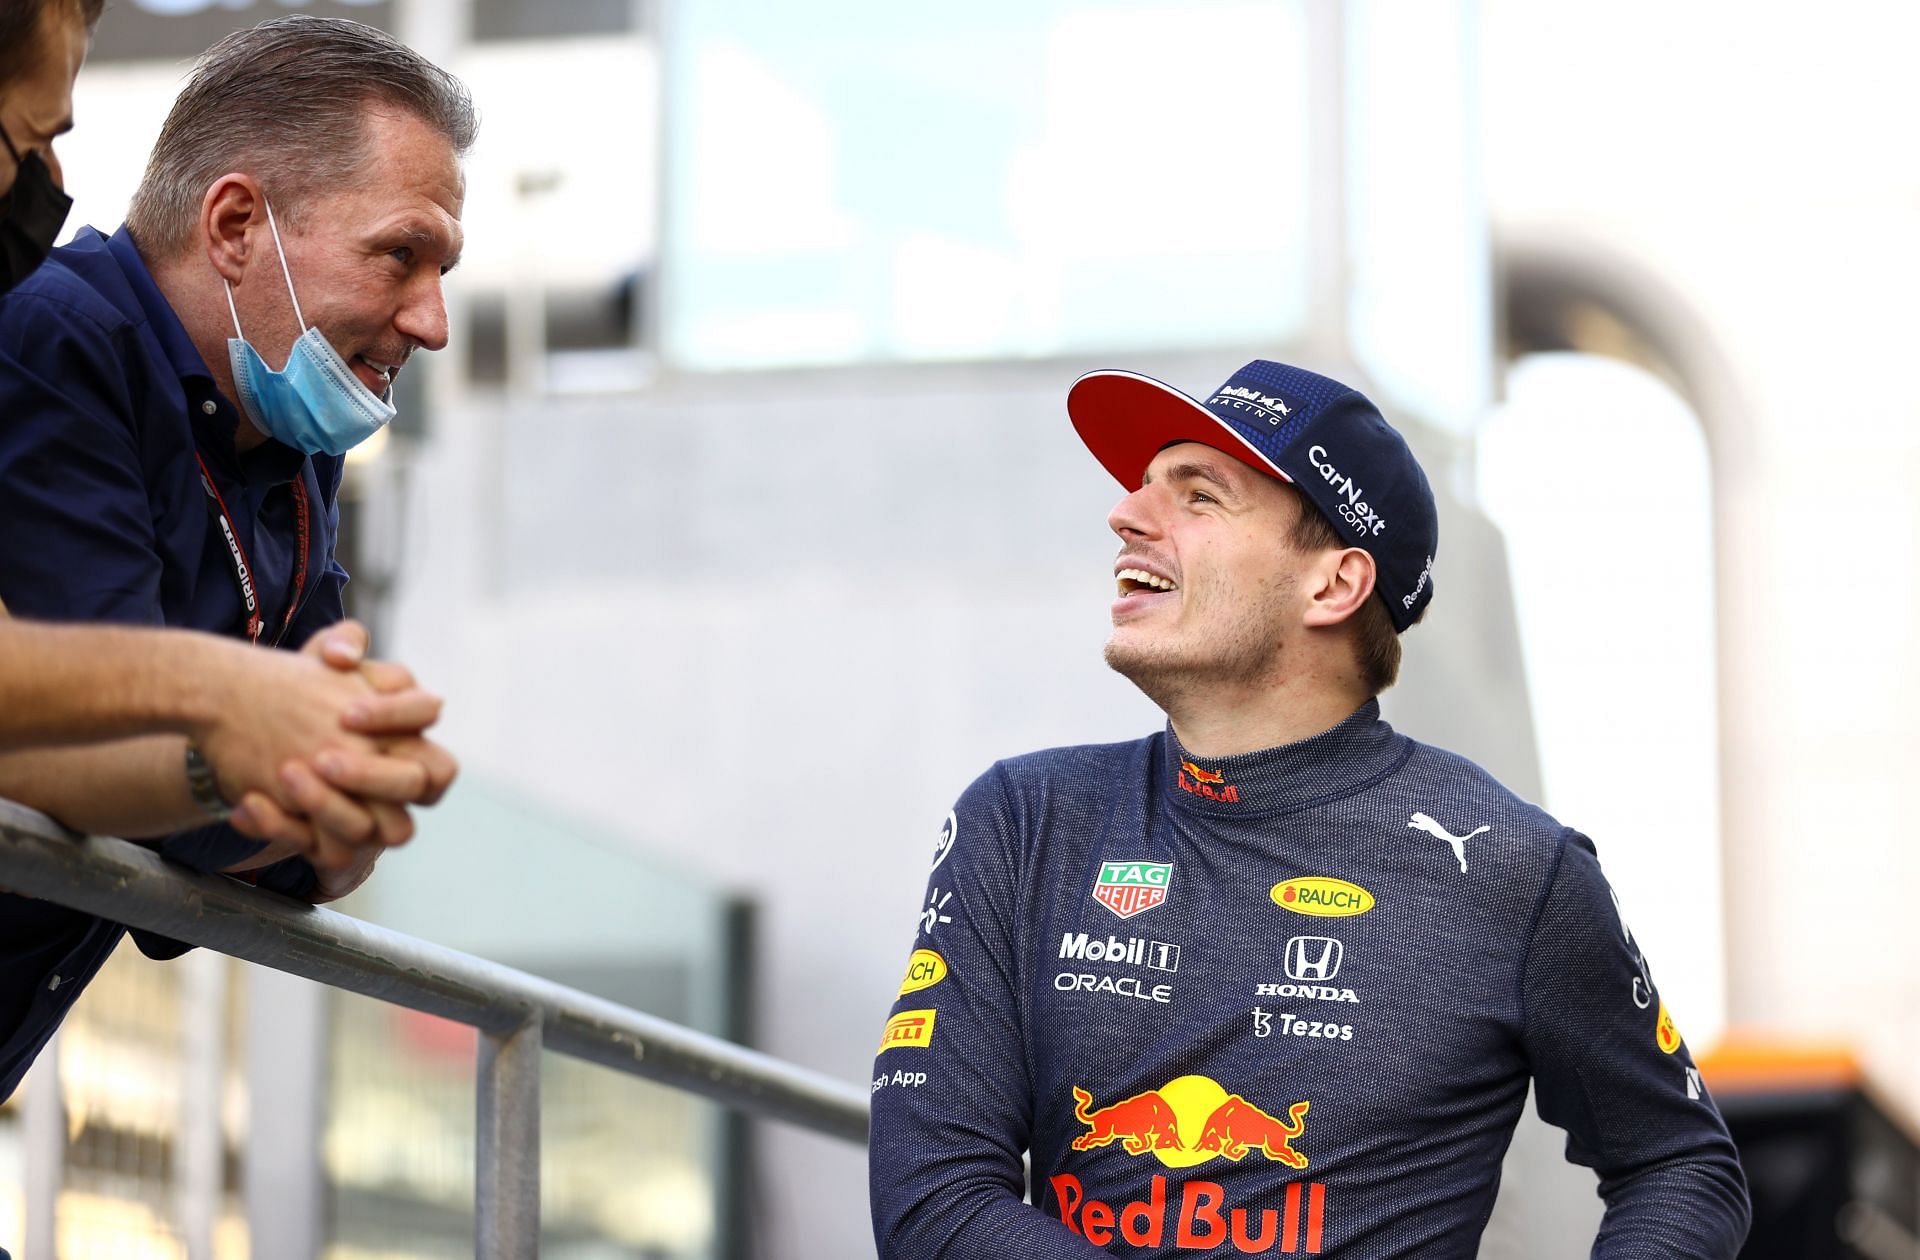 Max Verstappen talks with his father Jos Verstappen in the Pitlane during previews ahead of the 2021 Abu Dhabi GP. (Photo by Bryn Lennon/Getty Images)